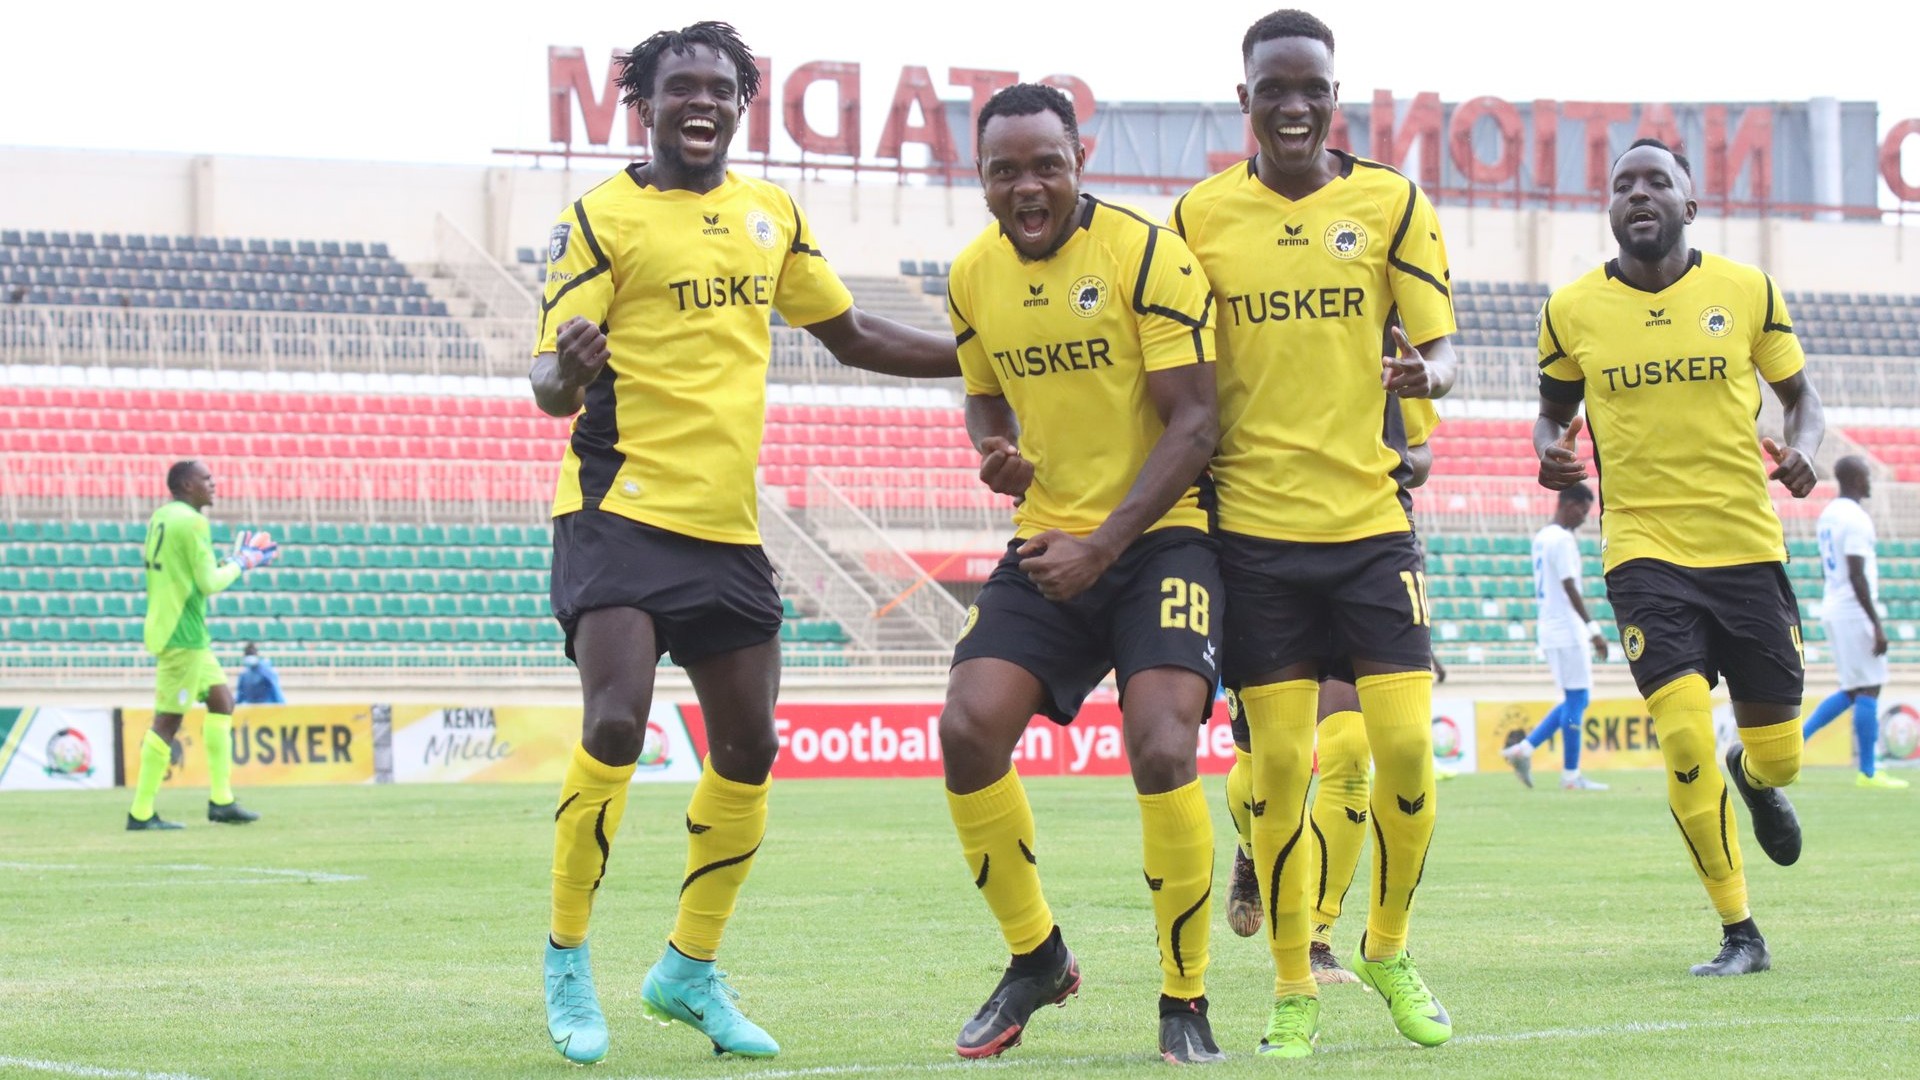 Tusker 2-0 Wazito FC: Brewers triumph to secure first FKF Premier League win